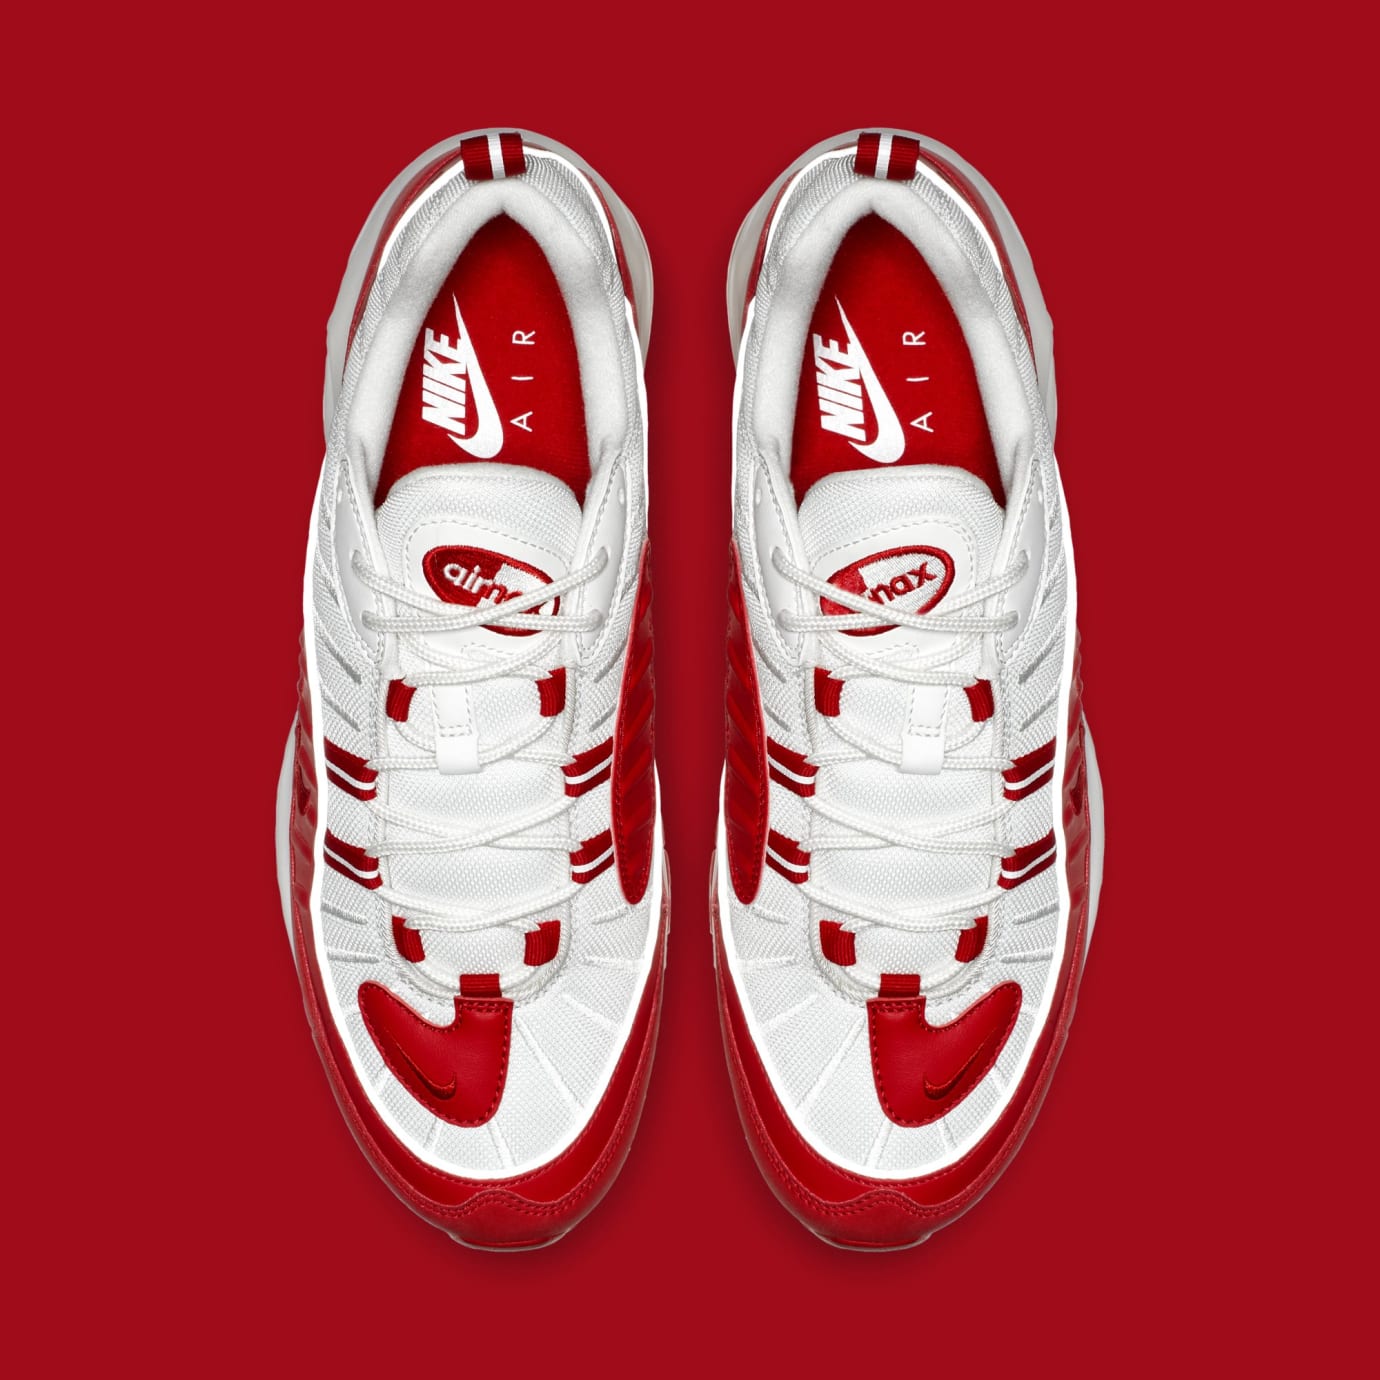 Nike Air Max 98 'University Red' 640744-602 Release Date | Collector